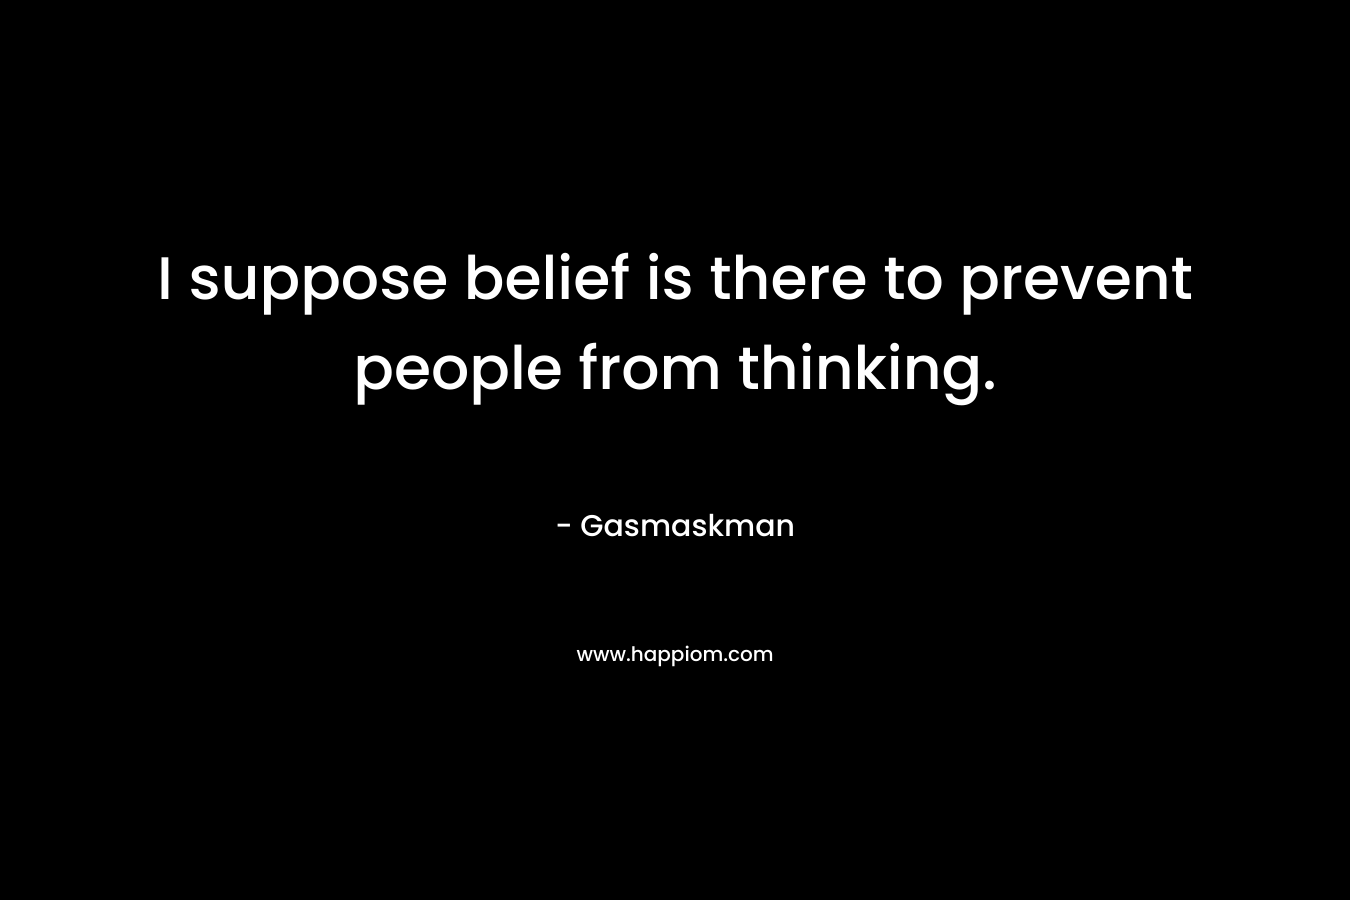 I suppose belief is there to prevent people from thinking. – Gasmaskman